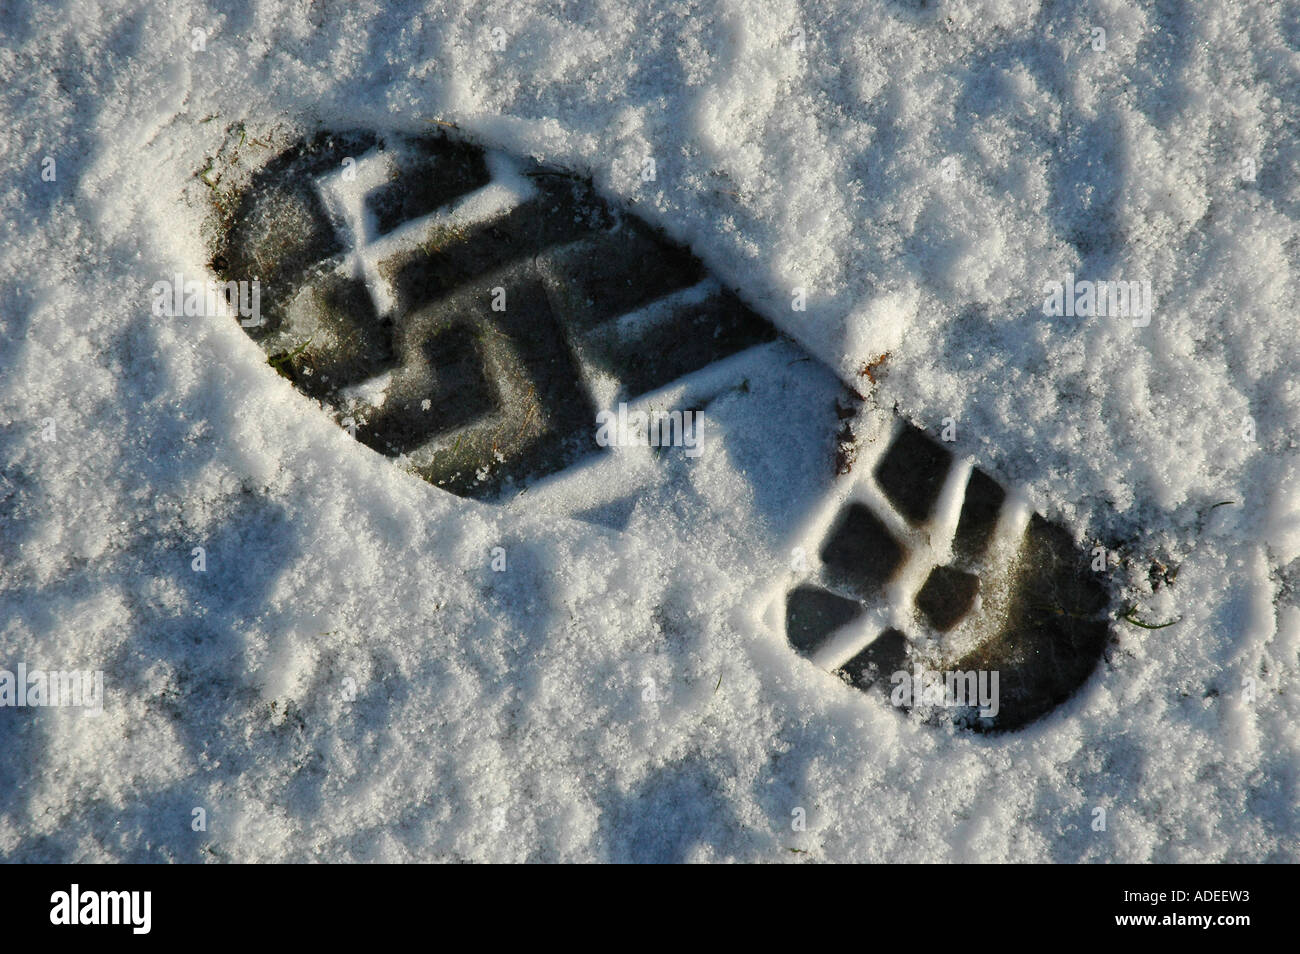 Foot print in the snow Stock Photo